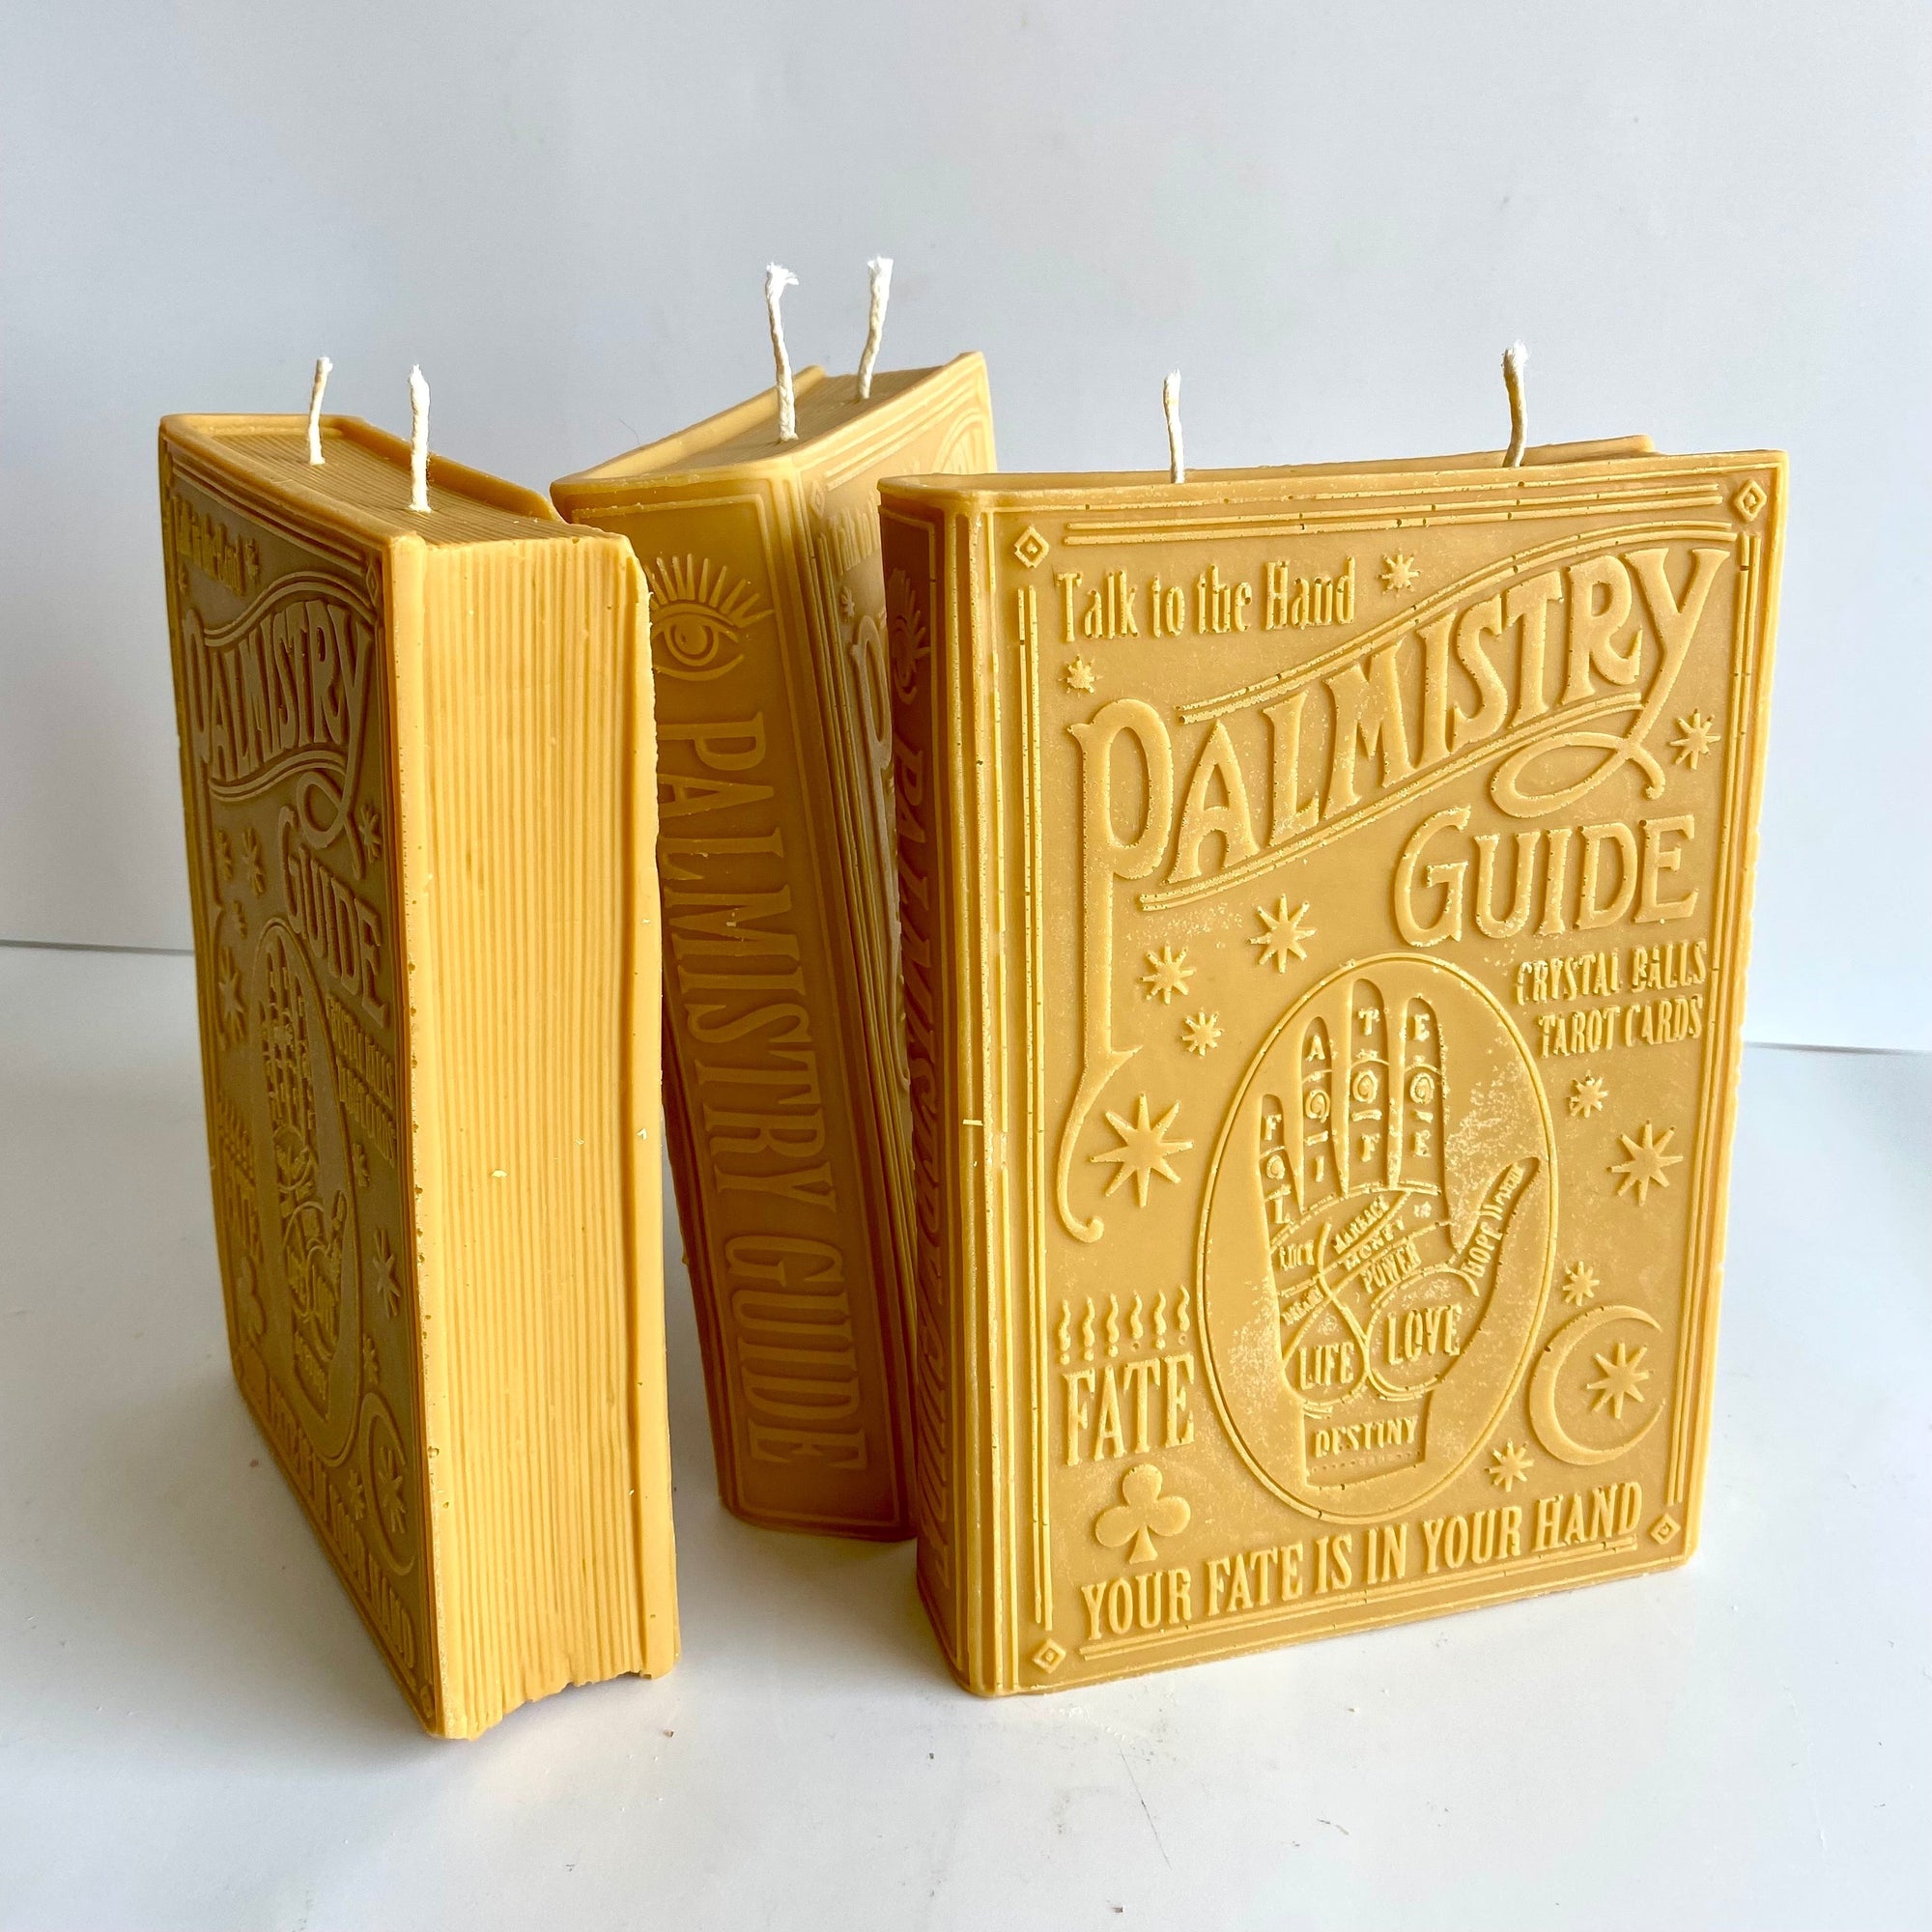 Palmistry Candle Book - Amber